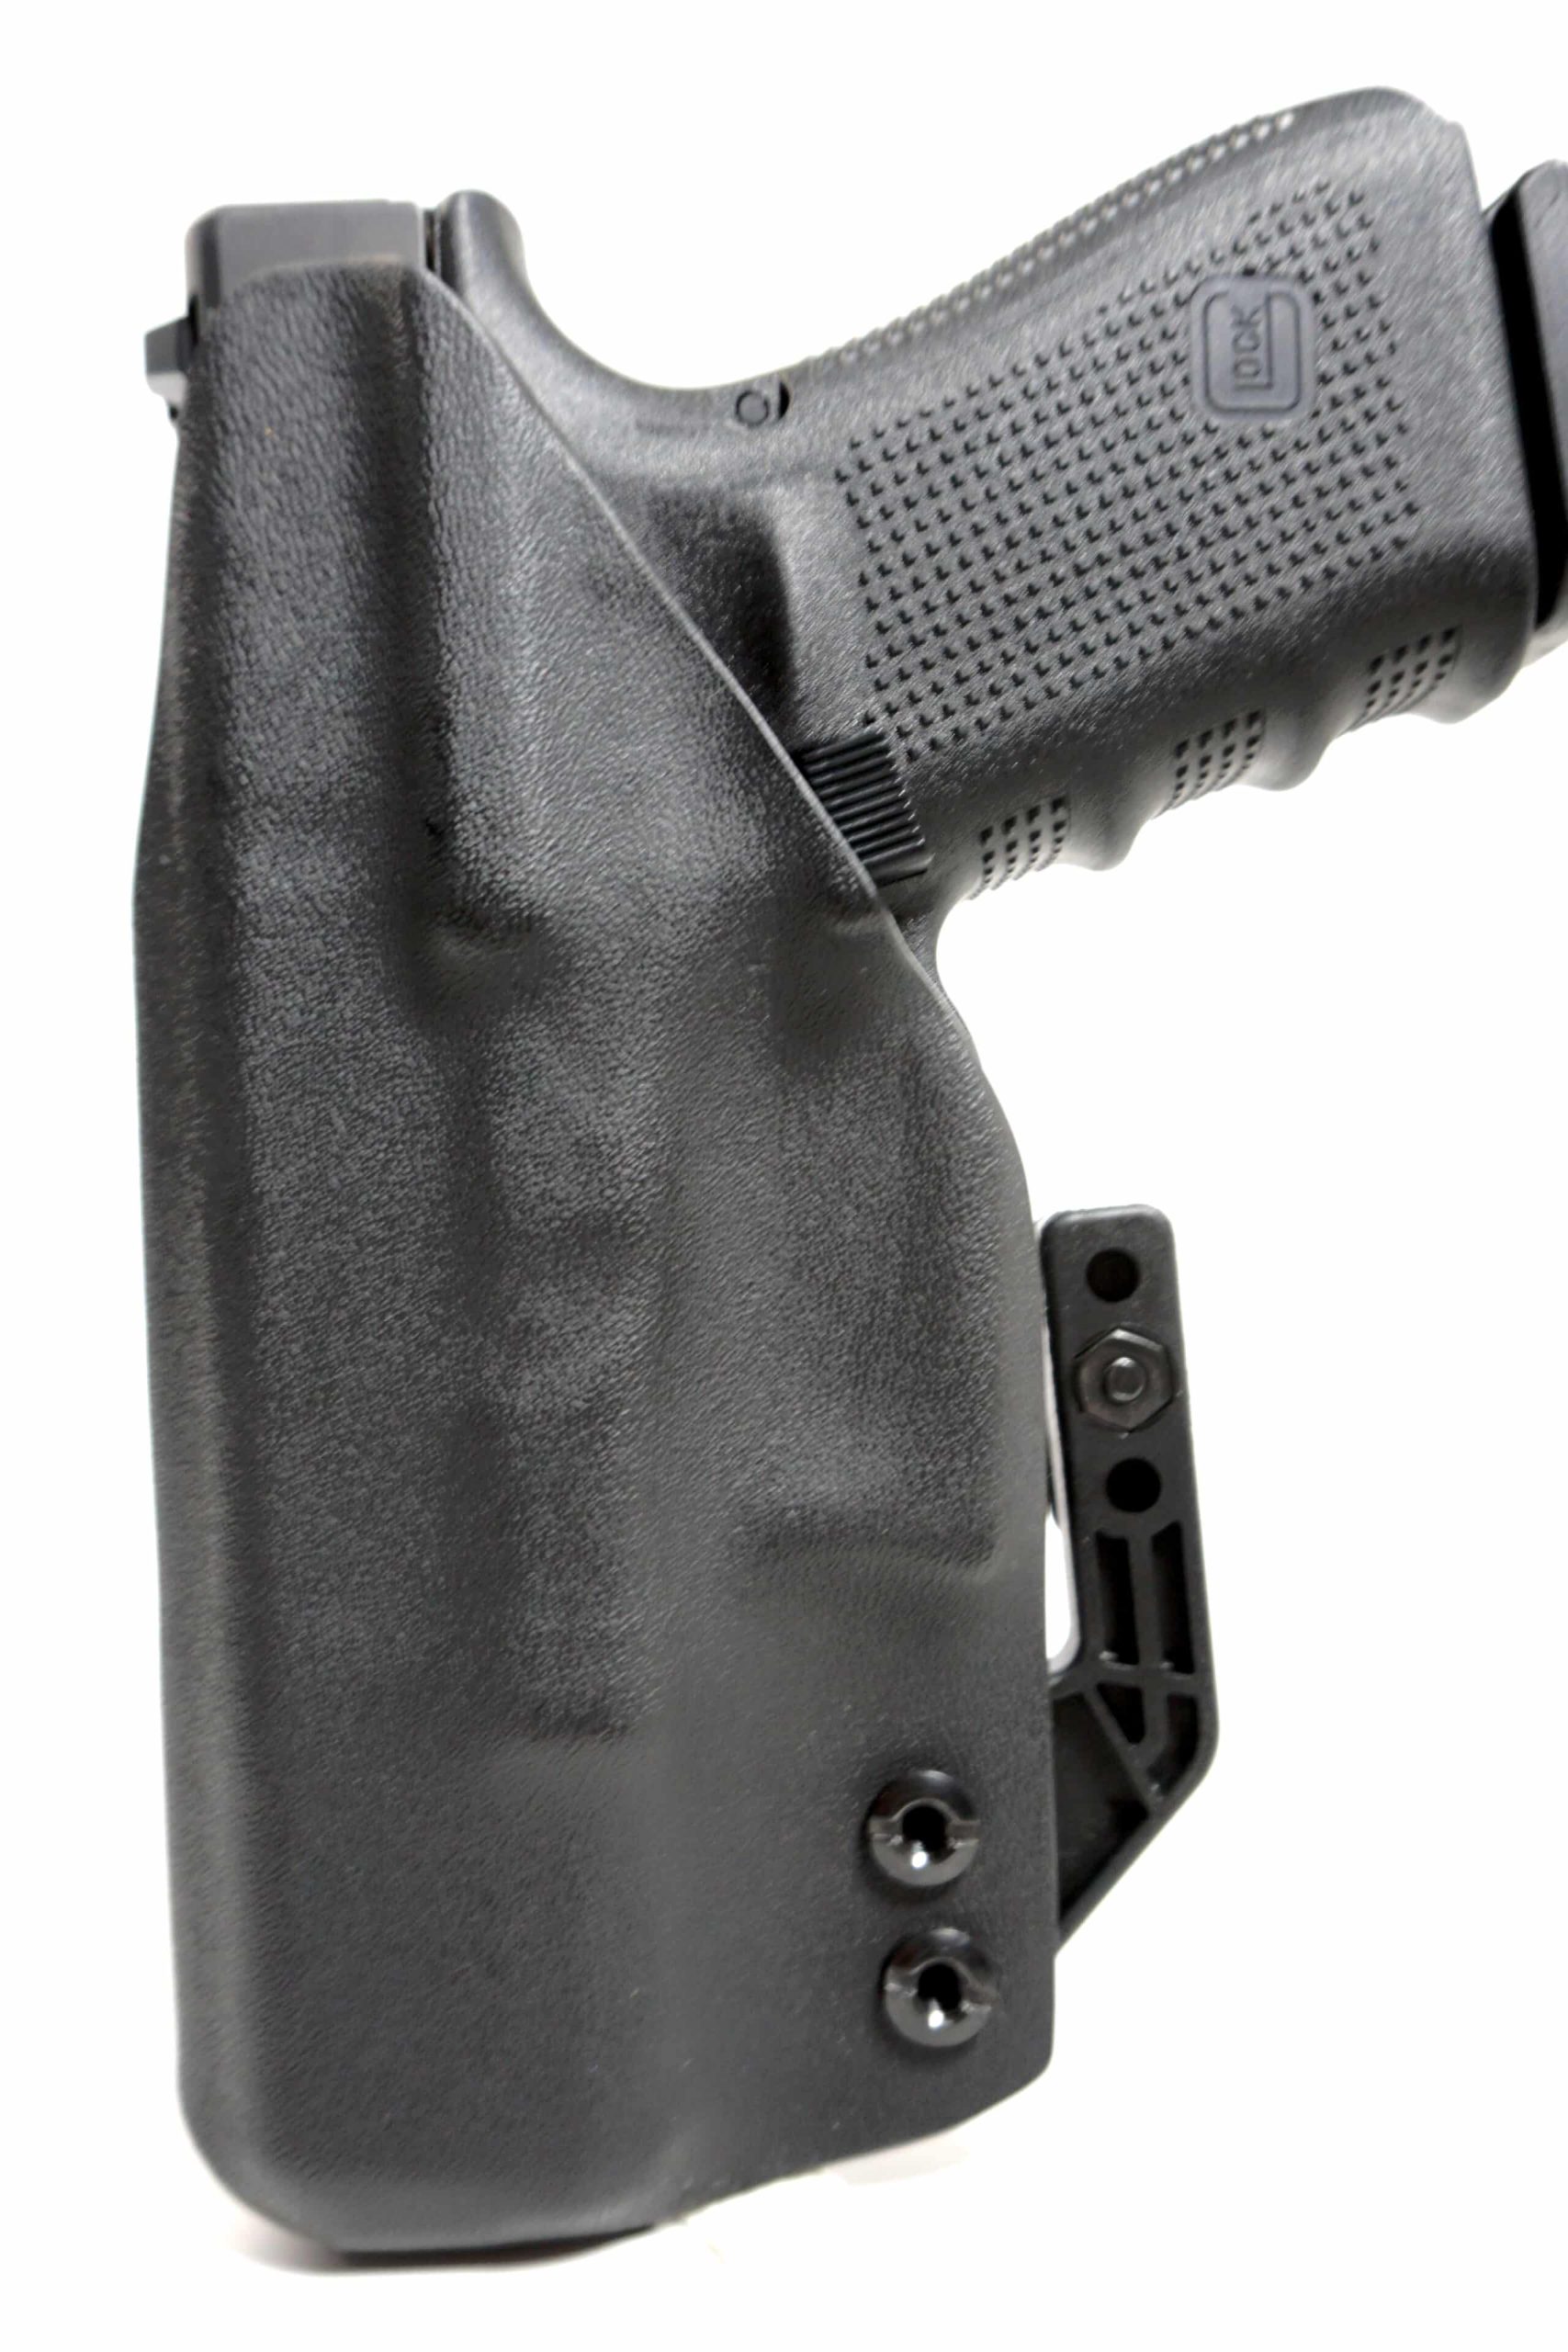 Ruger LCP w/ Crimson Trace IWB Kydex Holster - Made in USA